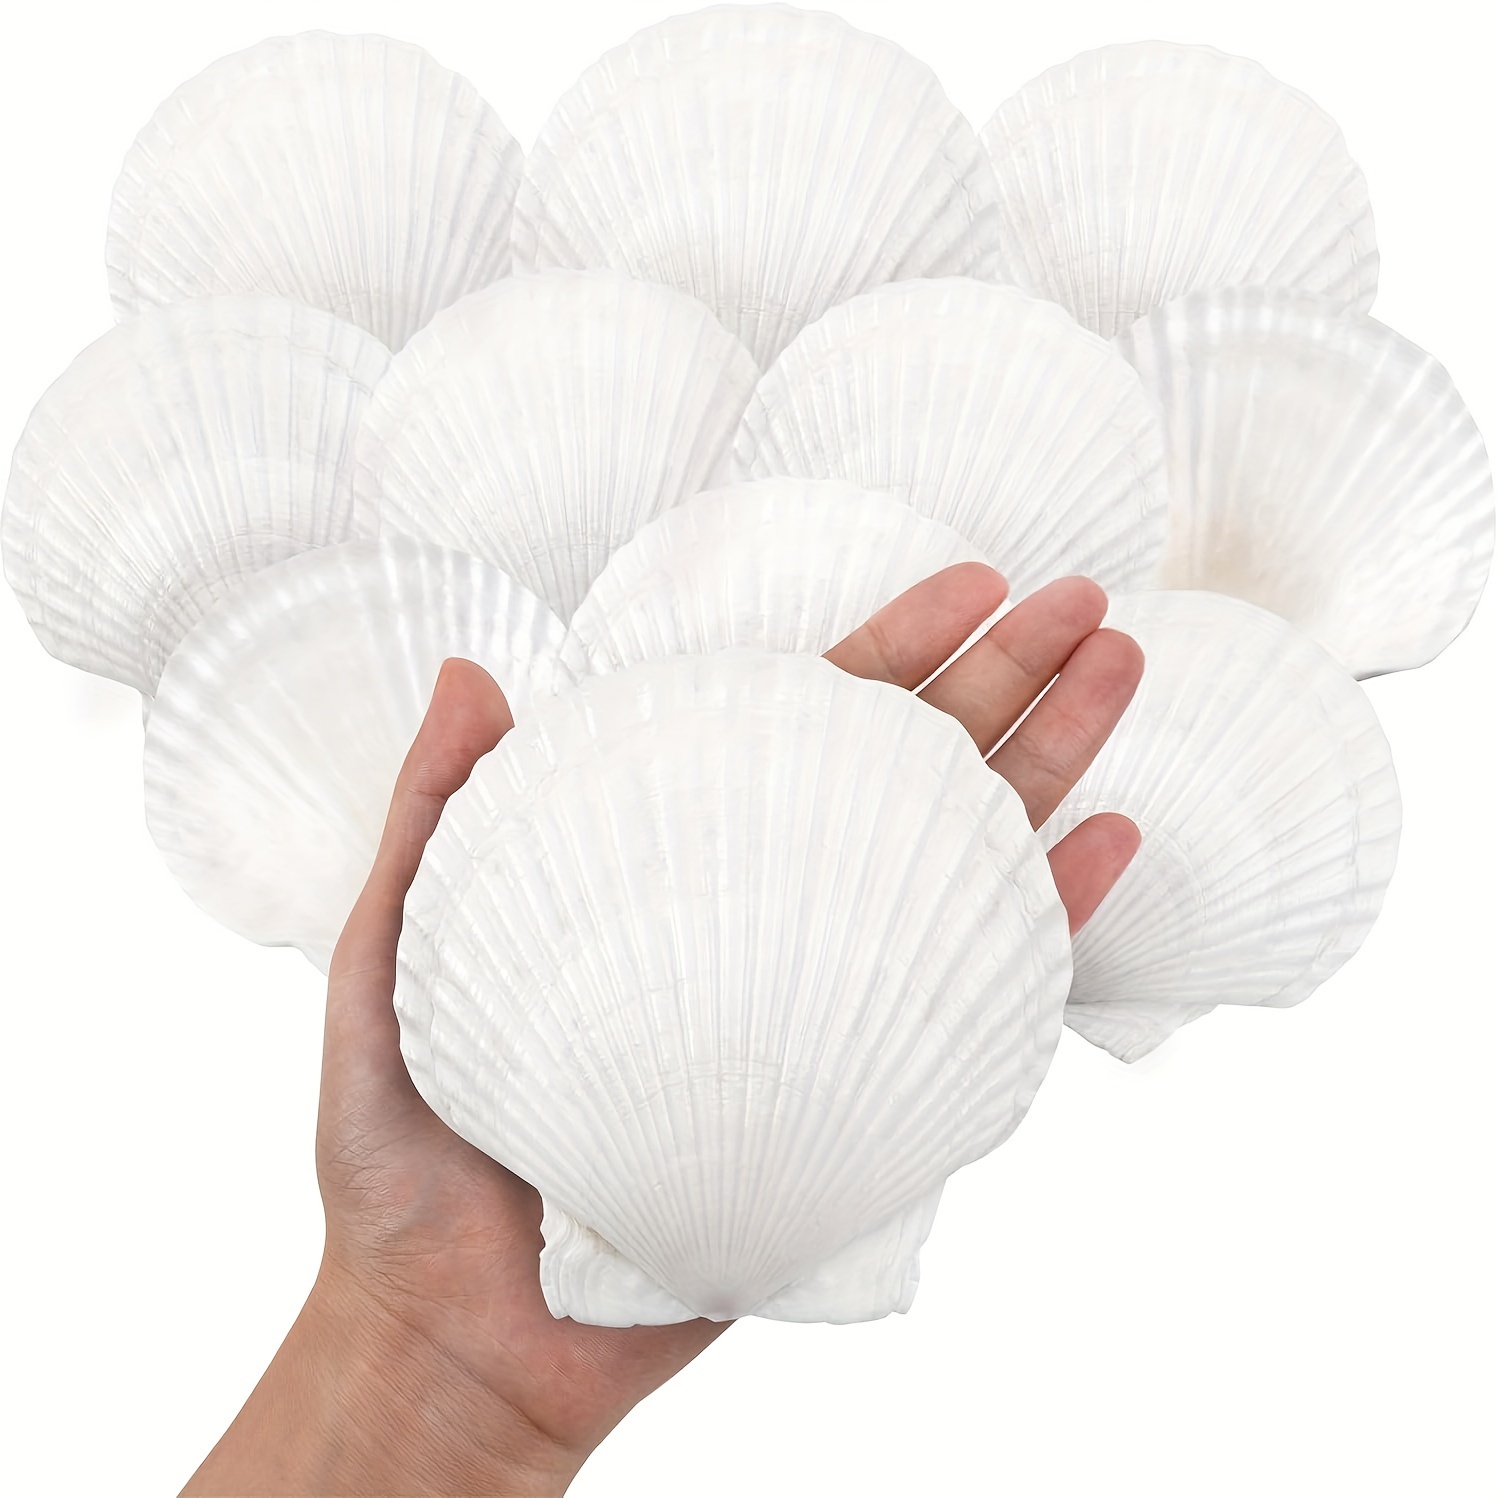 Scallop Natural Seashell for Beach Decoration and Crafts - BC9004